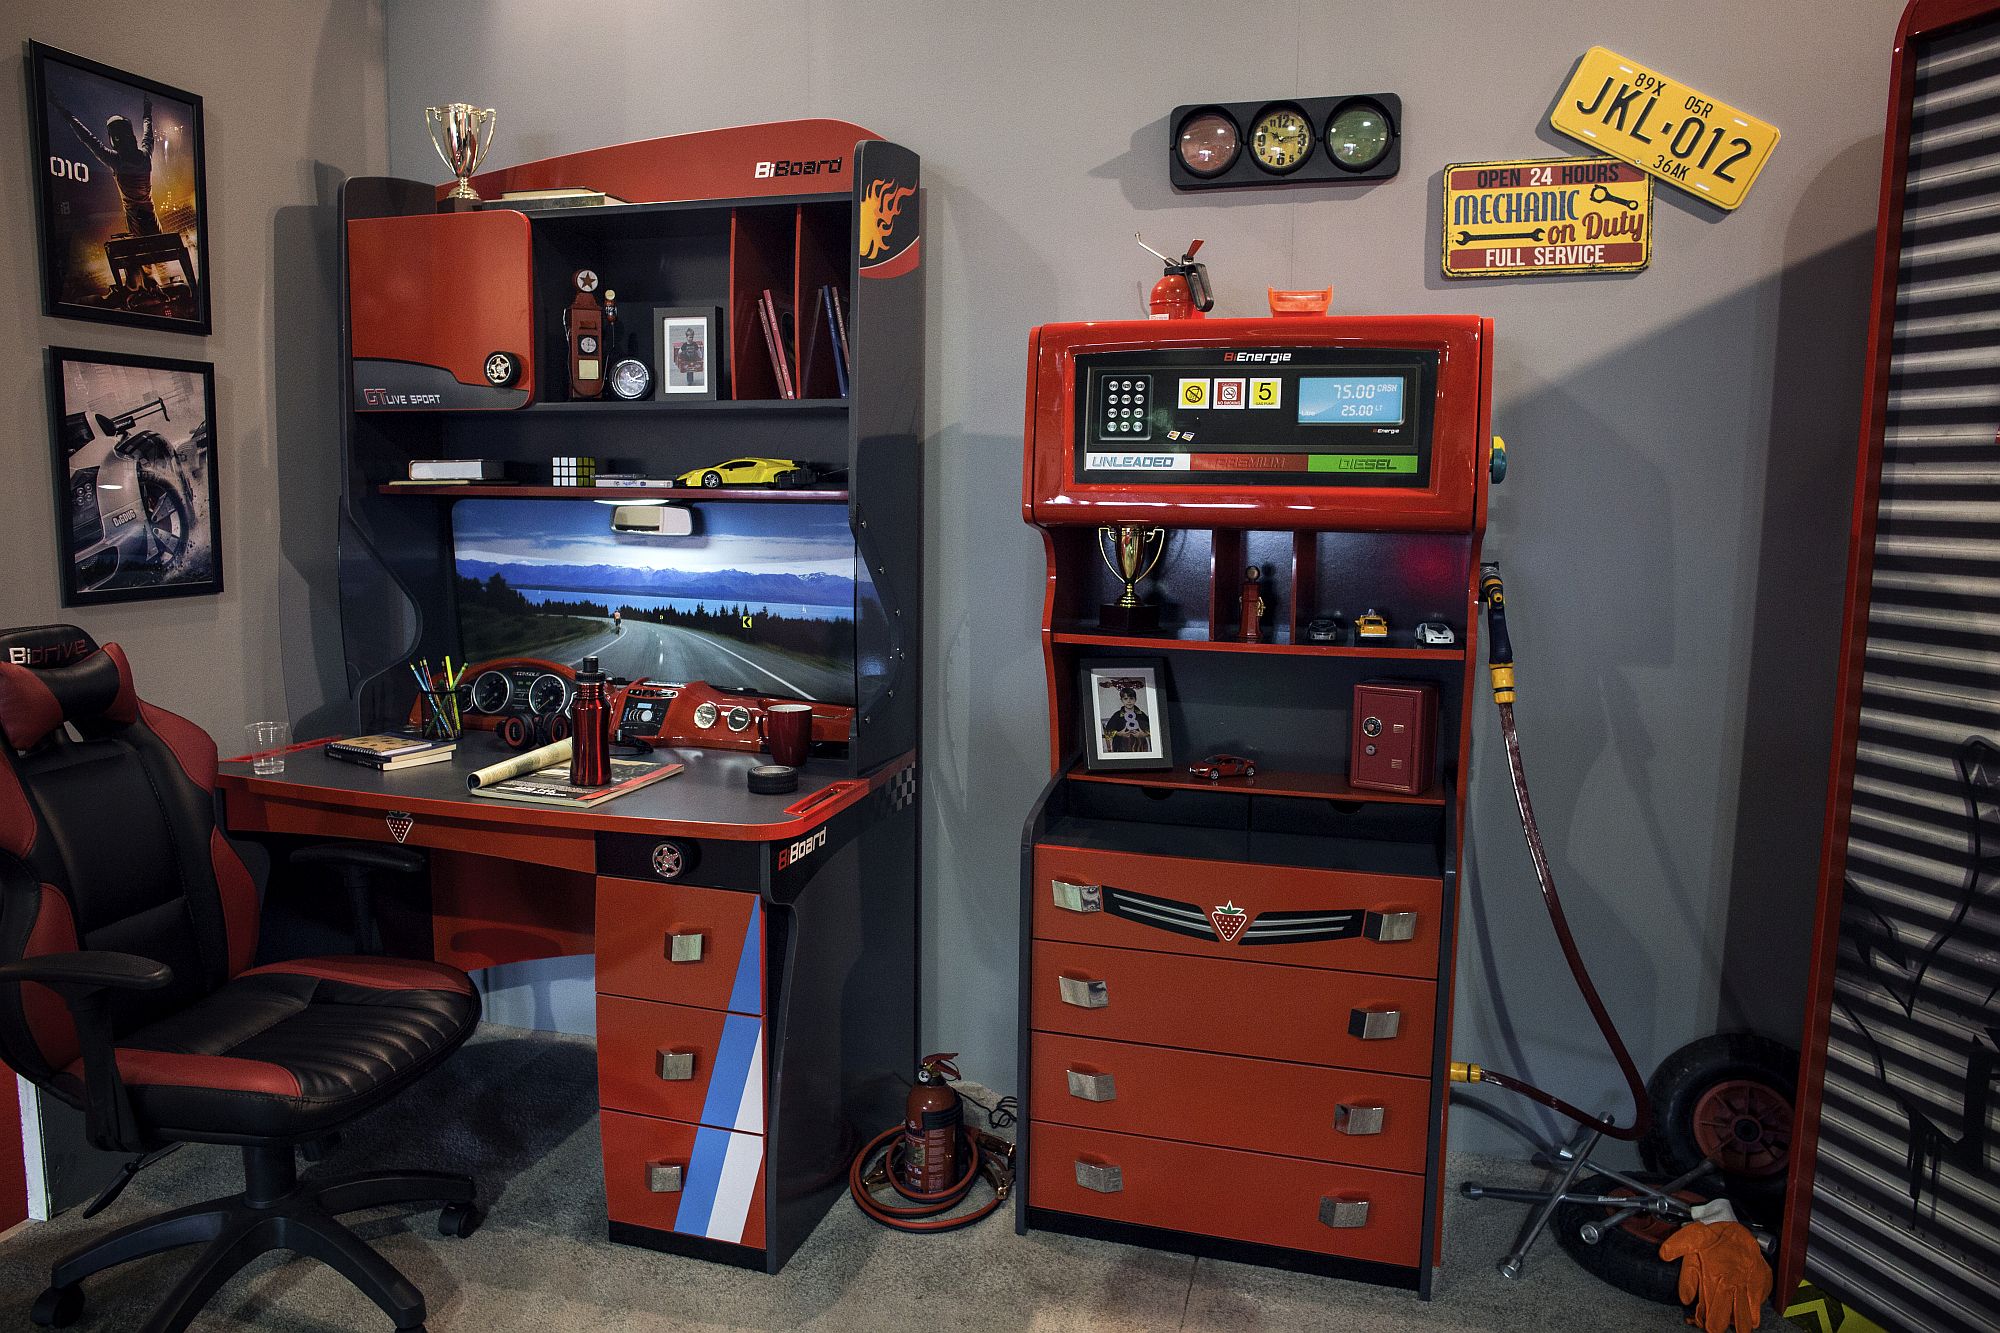 Kids-workstation-and-decor-design-inspired-by-arcade-gaming-consoles